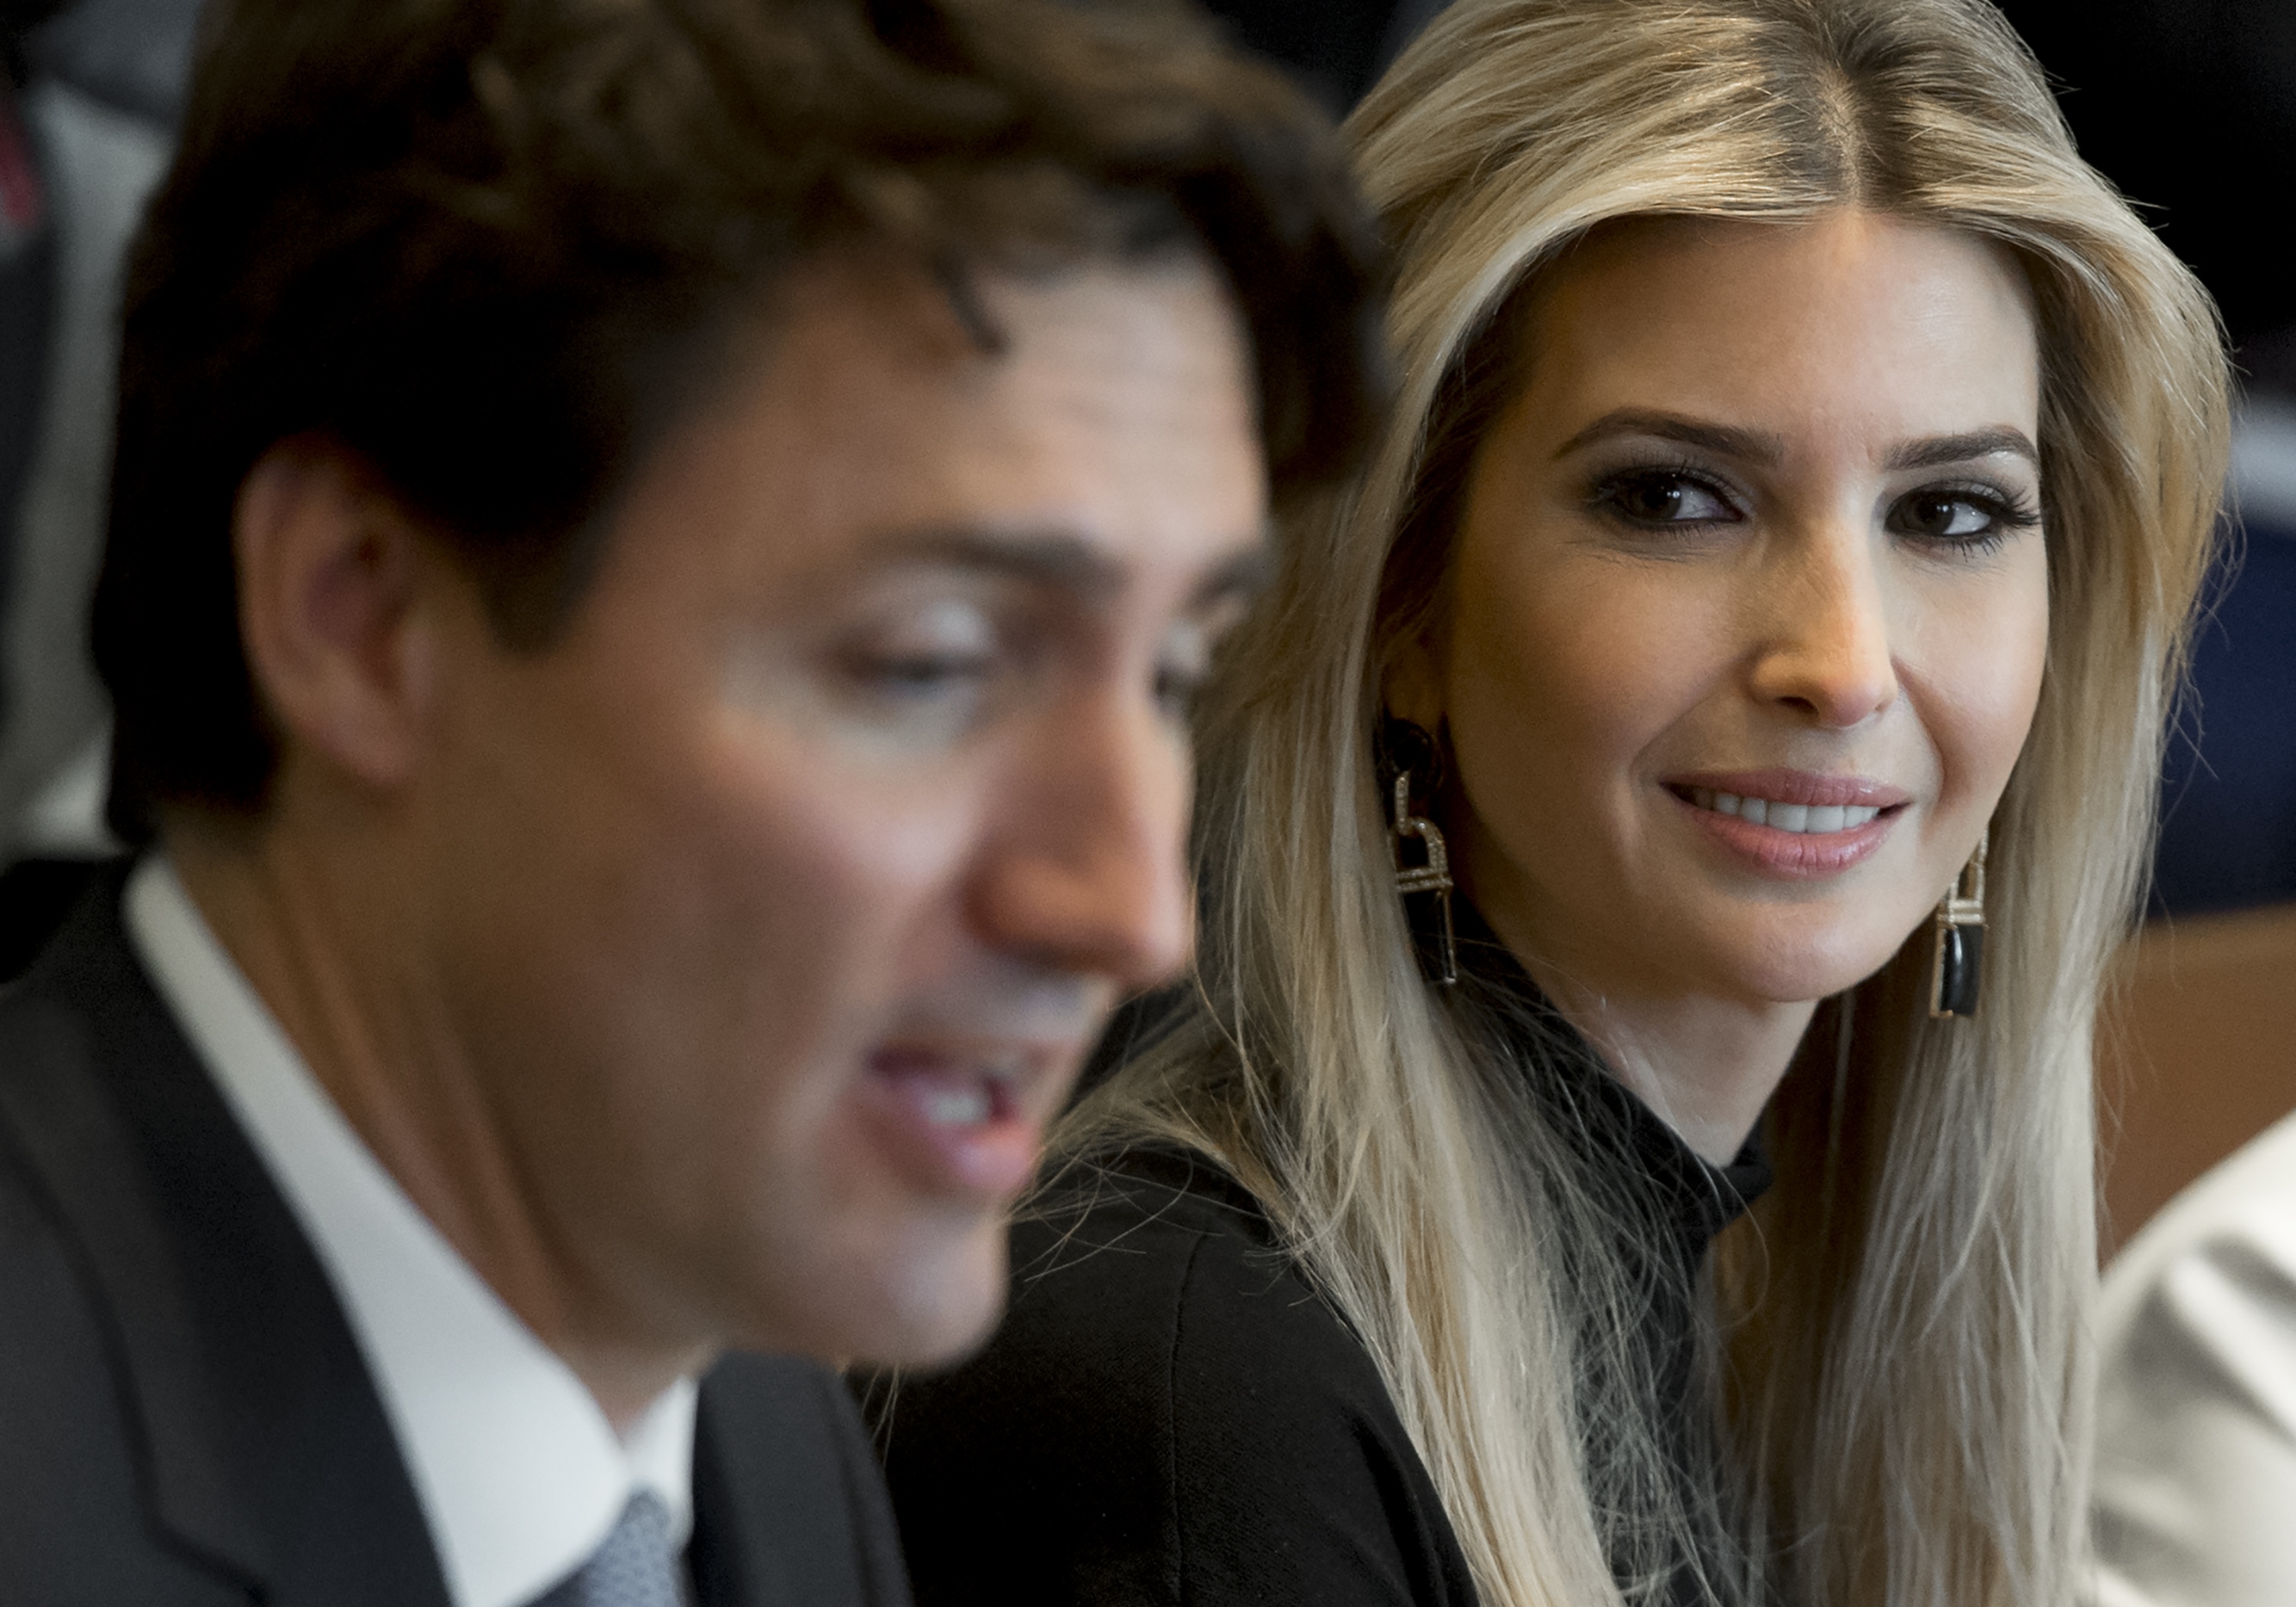 Canadian Prime Minister Justin Trudeau speaks alongside Ivanka Trump, daughter of US President Donald Trump, during a roundtable discussion on women entrepreneurs and business leaders in the Cabinet Room of the White House in Washington, DC, February 13, 2017. SAUL LOEB/AFP/Getty Images